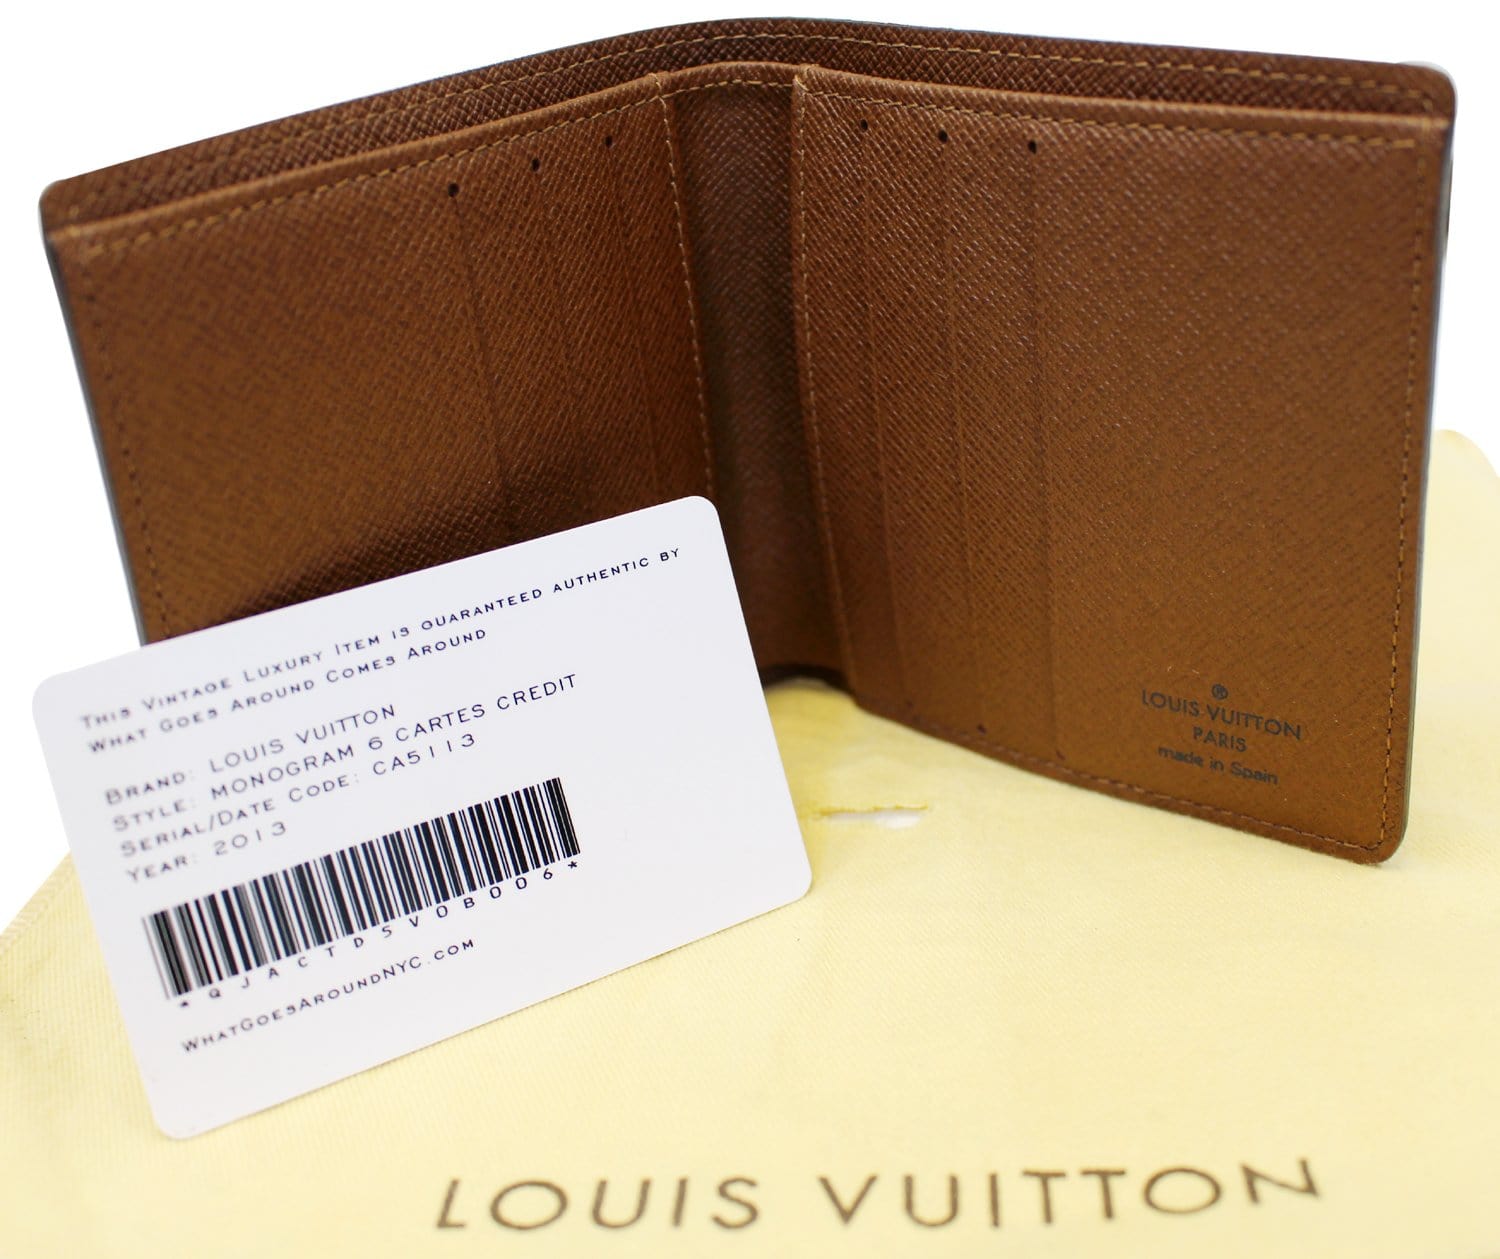 Louis Vuitton LV Monogram Coated Canvas Card Case - Red Wallets,  Accessories - LOU781436